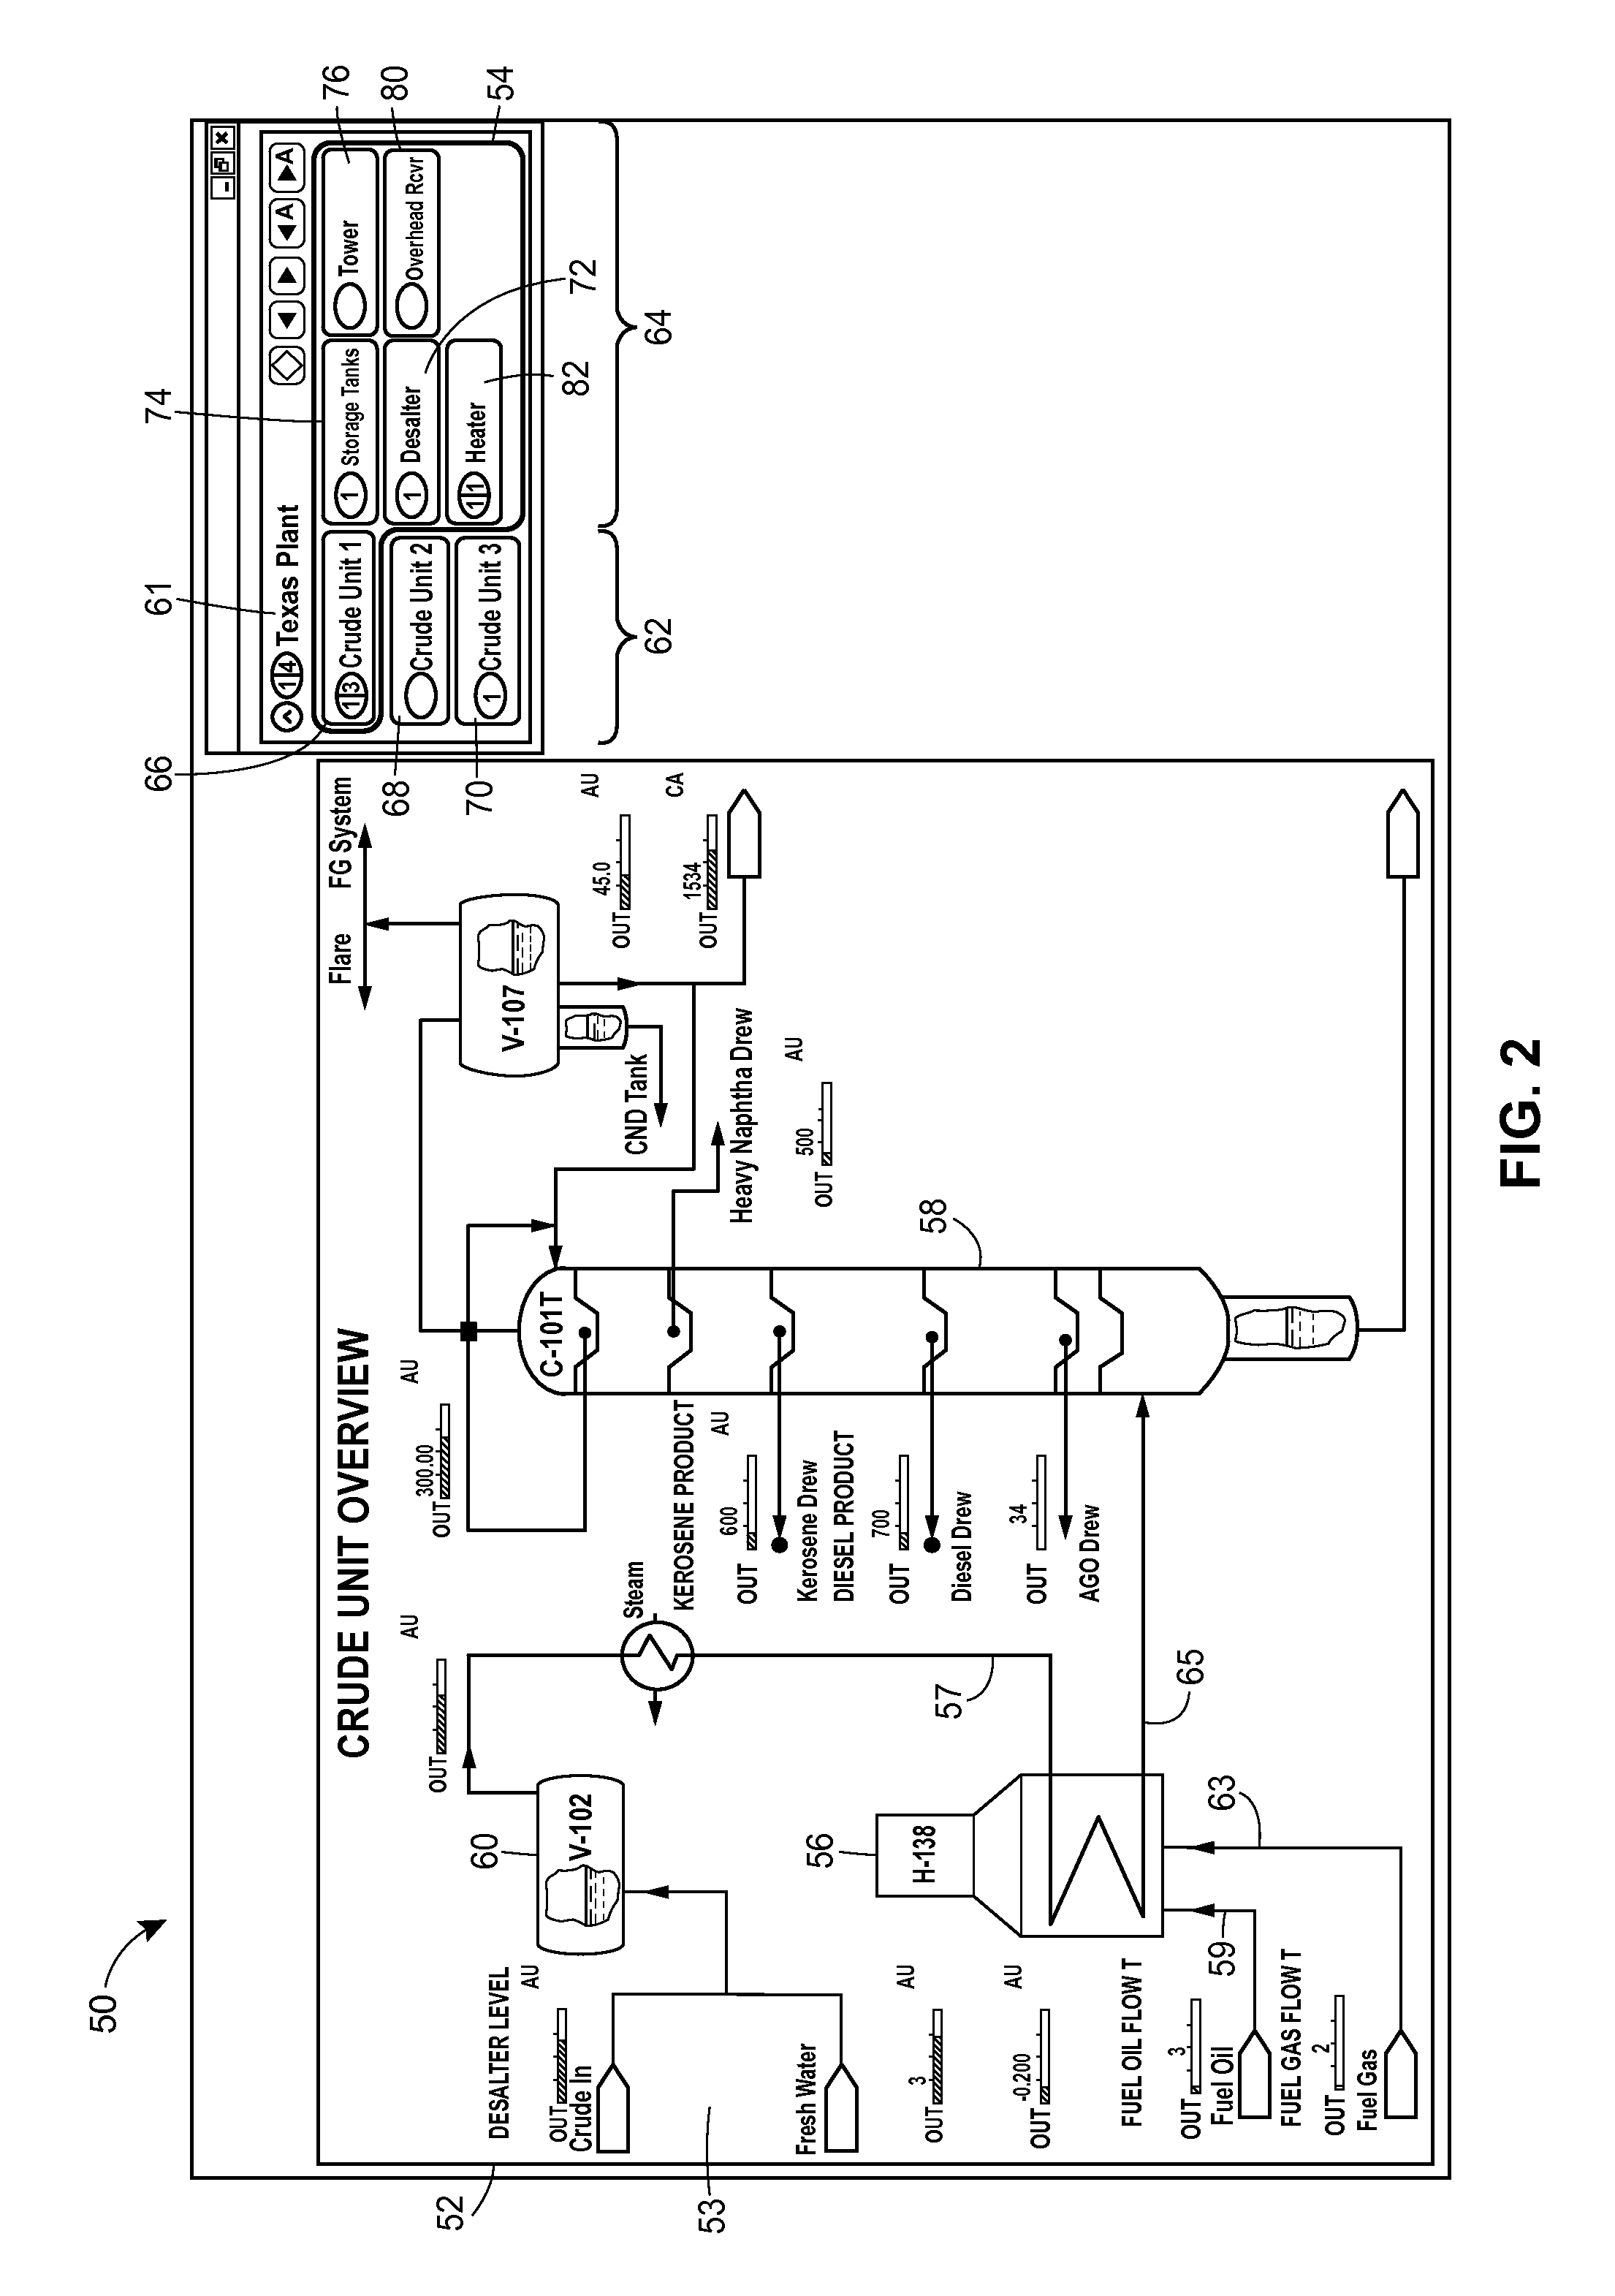 Graphical process variable trend monitoring in a process control system using a navigation pane